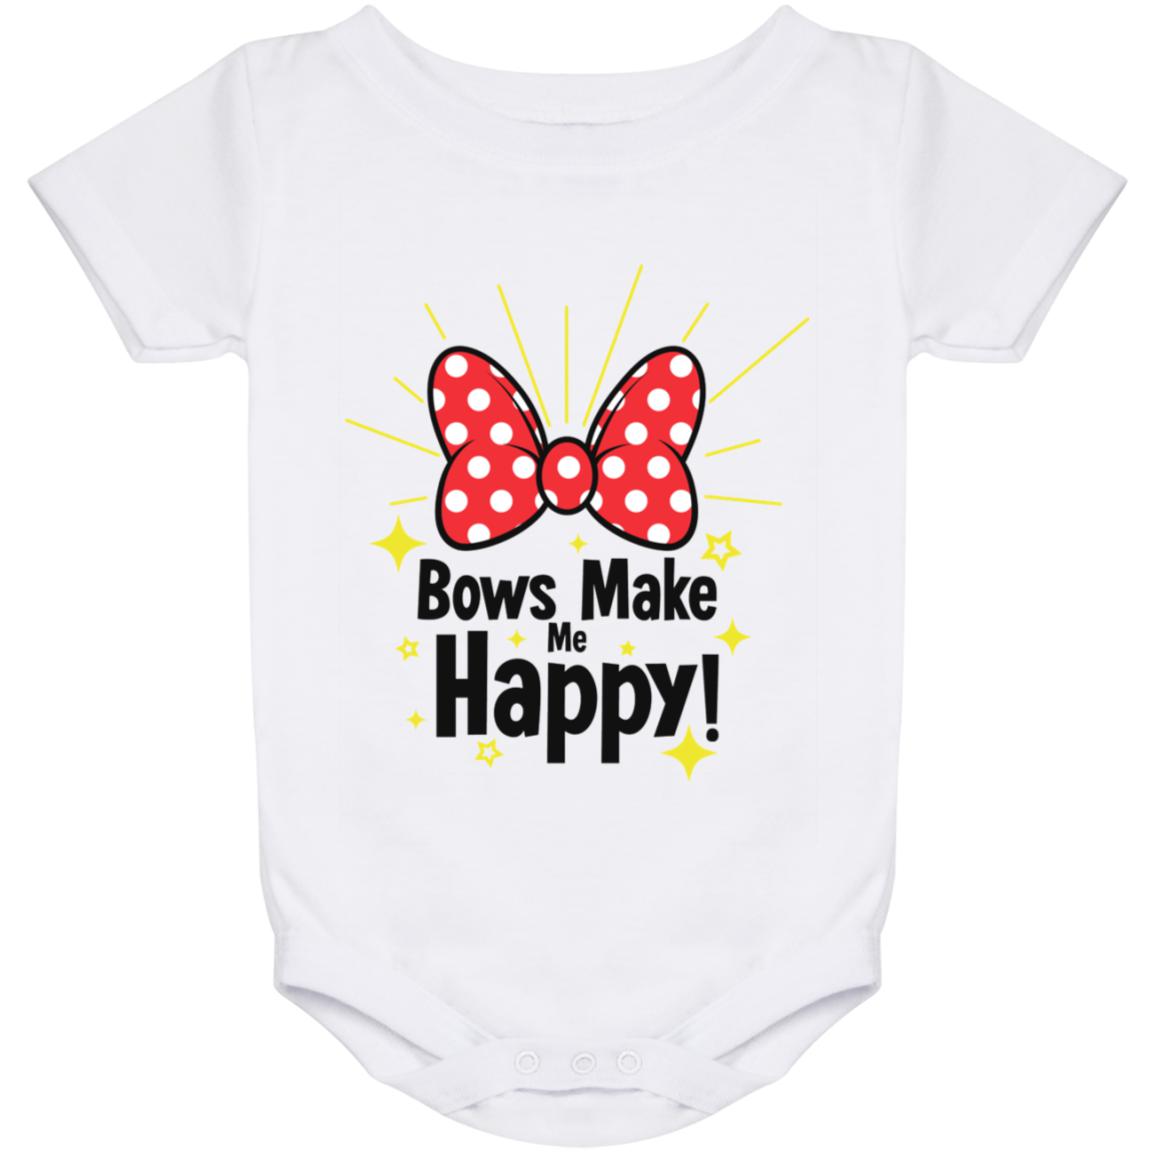 Bows Make Me Happy - Baby Onesie 24 Month